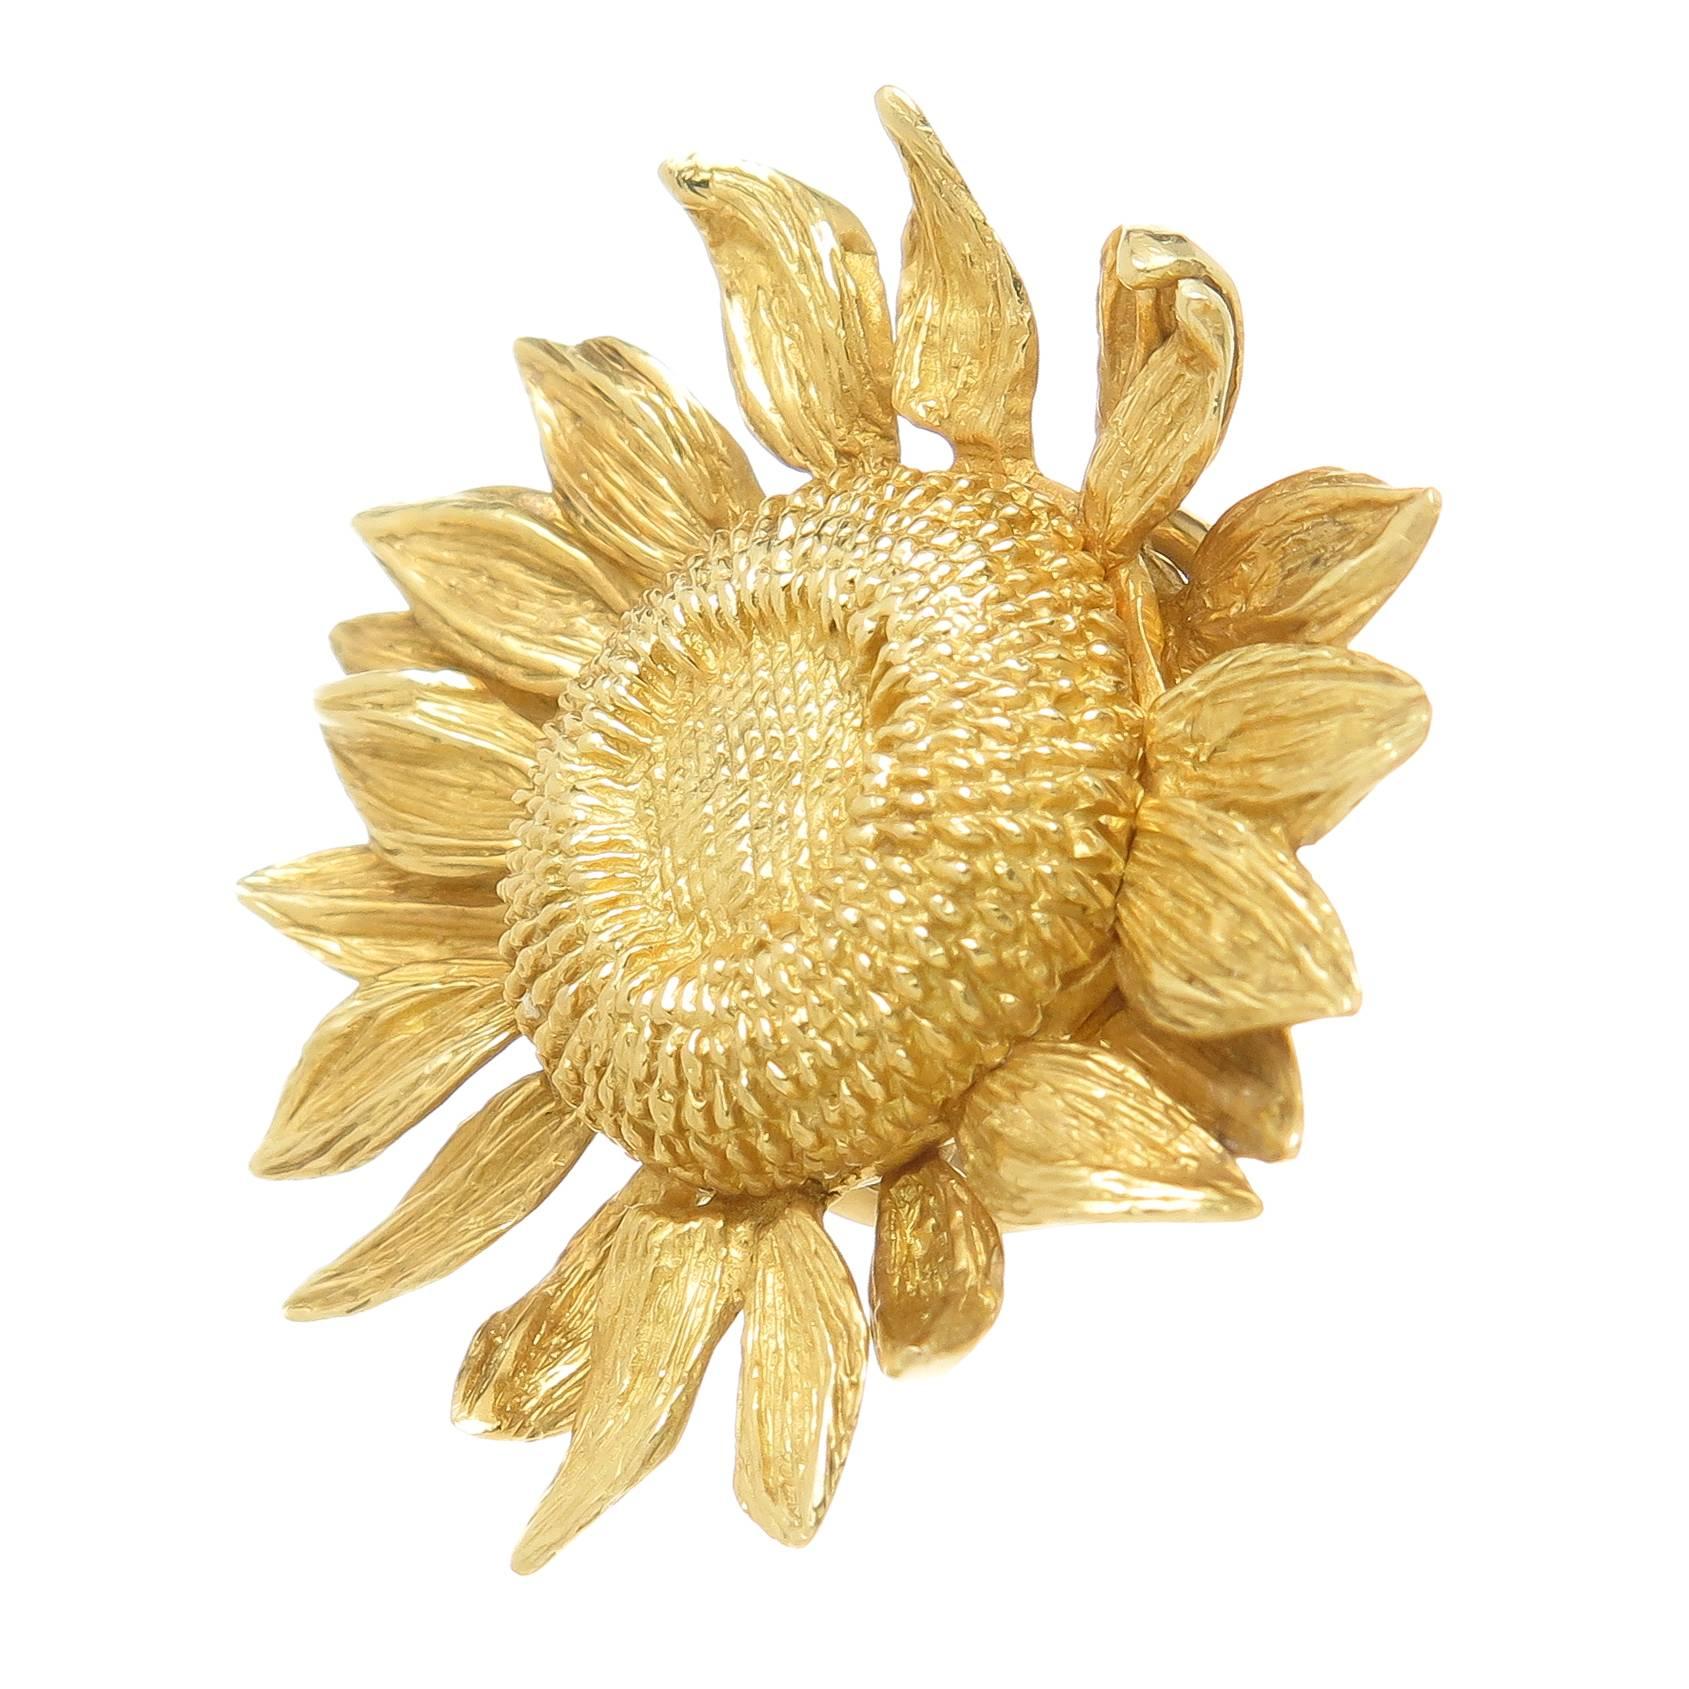 Circa 2000 Asprey 18K yellow Gold Sun Flower Earrings, owned and Worn by Dame Joan Collins. Measuring 1 1/4 inch in diameter, of solid construction and having good weight and a textured finish. Omega clip backs to which a post can be easily added if